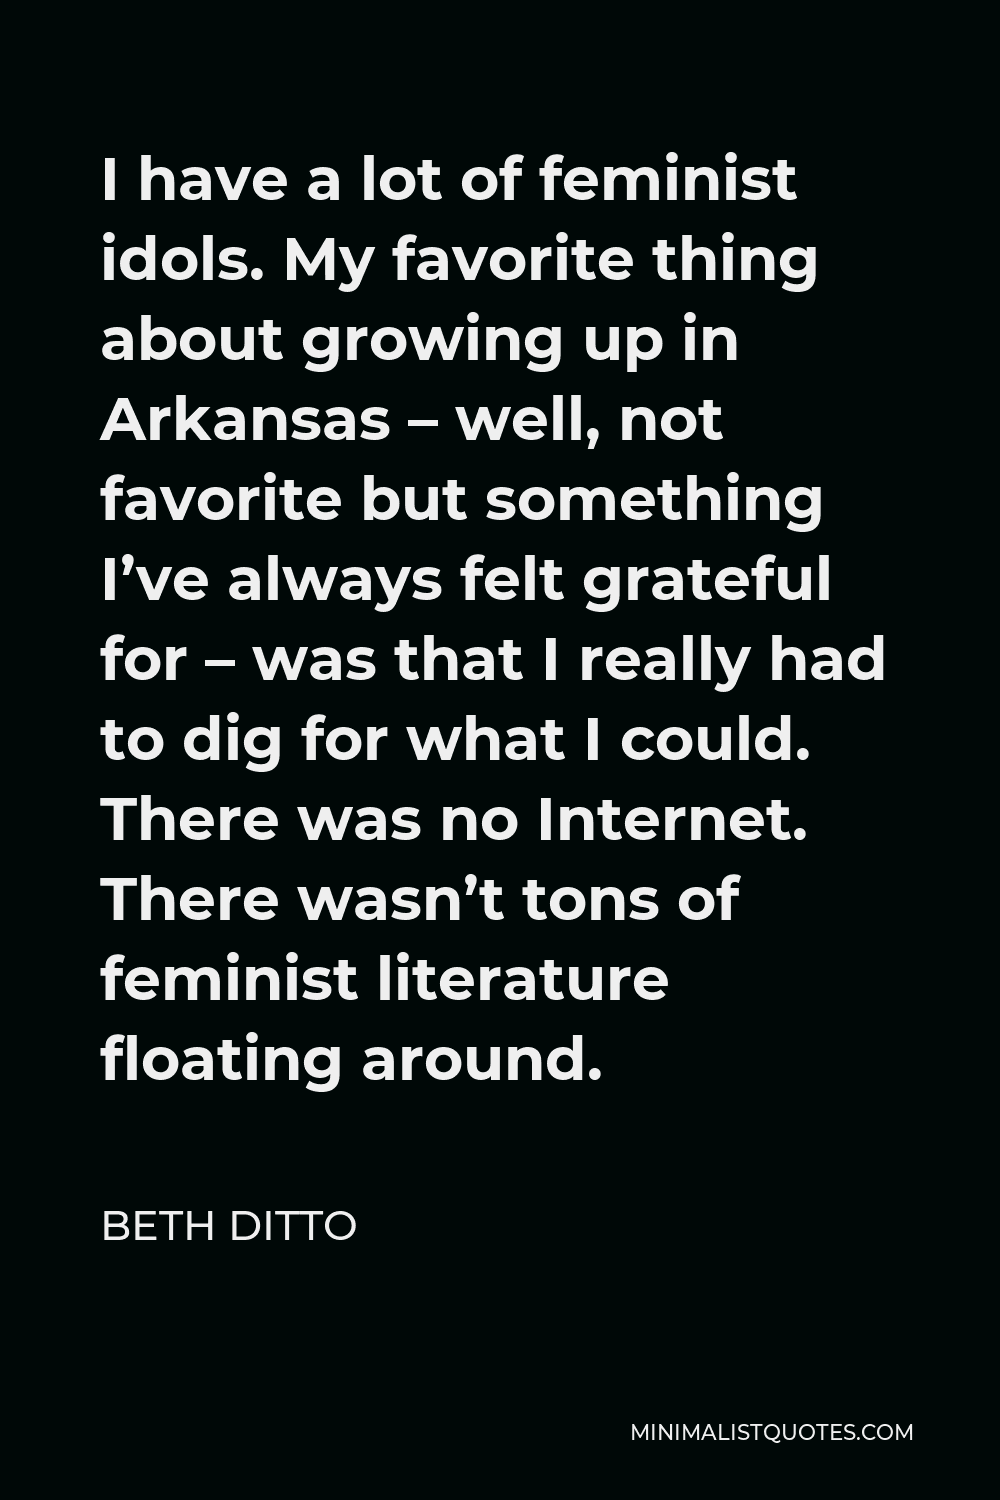 Beth Ditto Quote - I have a lot of feminist idols. My favorite thing about growing up in Arkansas – well, not favorite but something I’ve always felt grateful for – was that I really had to dig for what I could. There was no Internet. There wasn’t tons of feminist literature floating around.